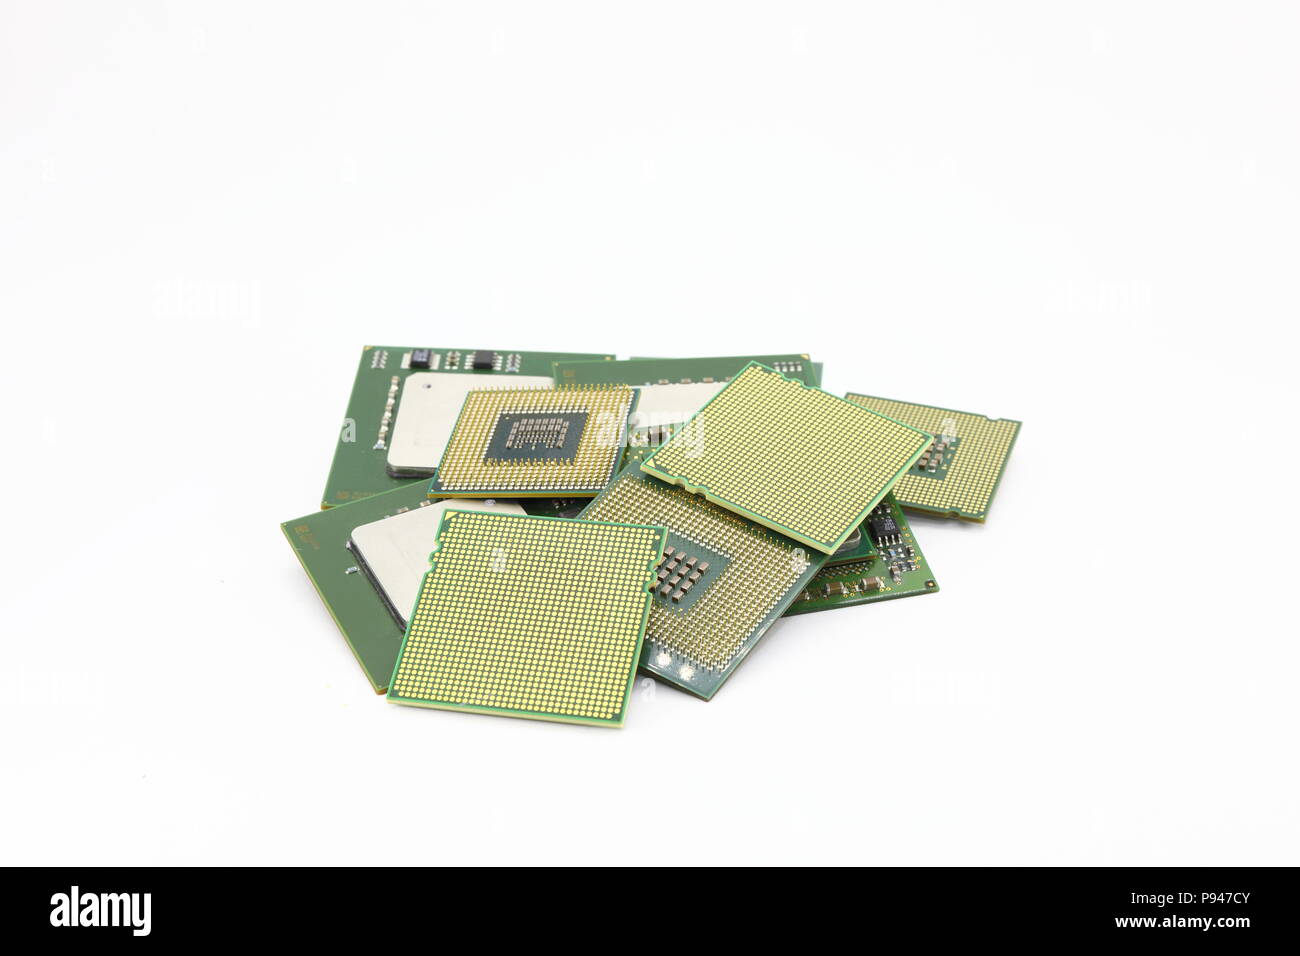 vareity of computer CPU, Processor Isolated on white background. Stock Photo